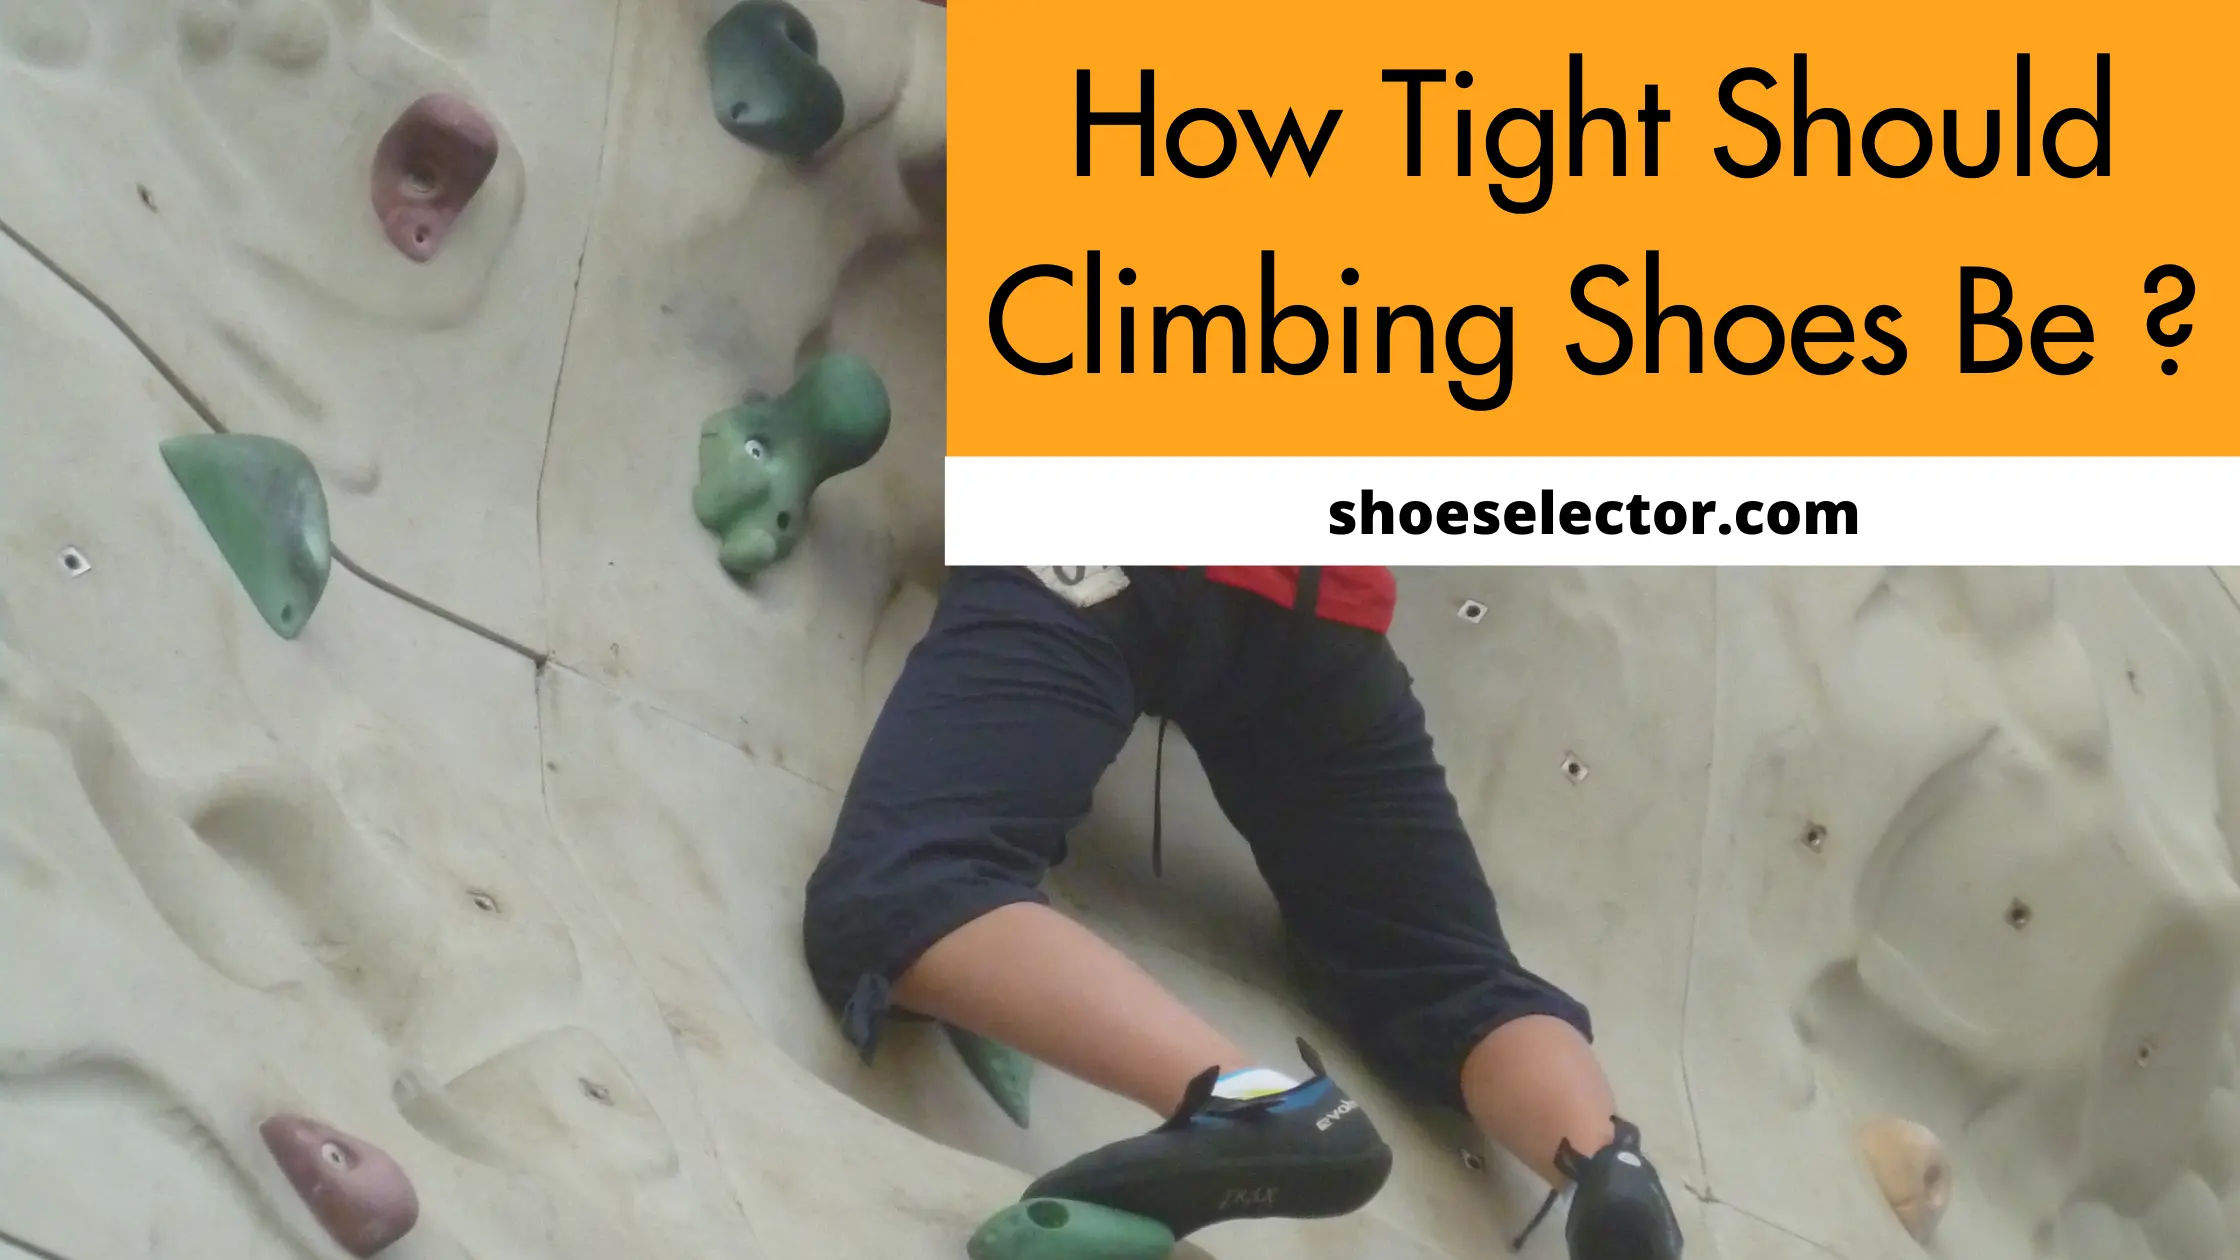 How Tight Should Climbing Shoes Be? 